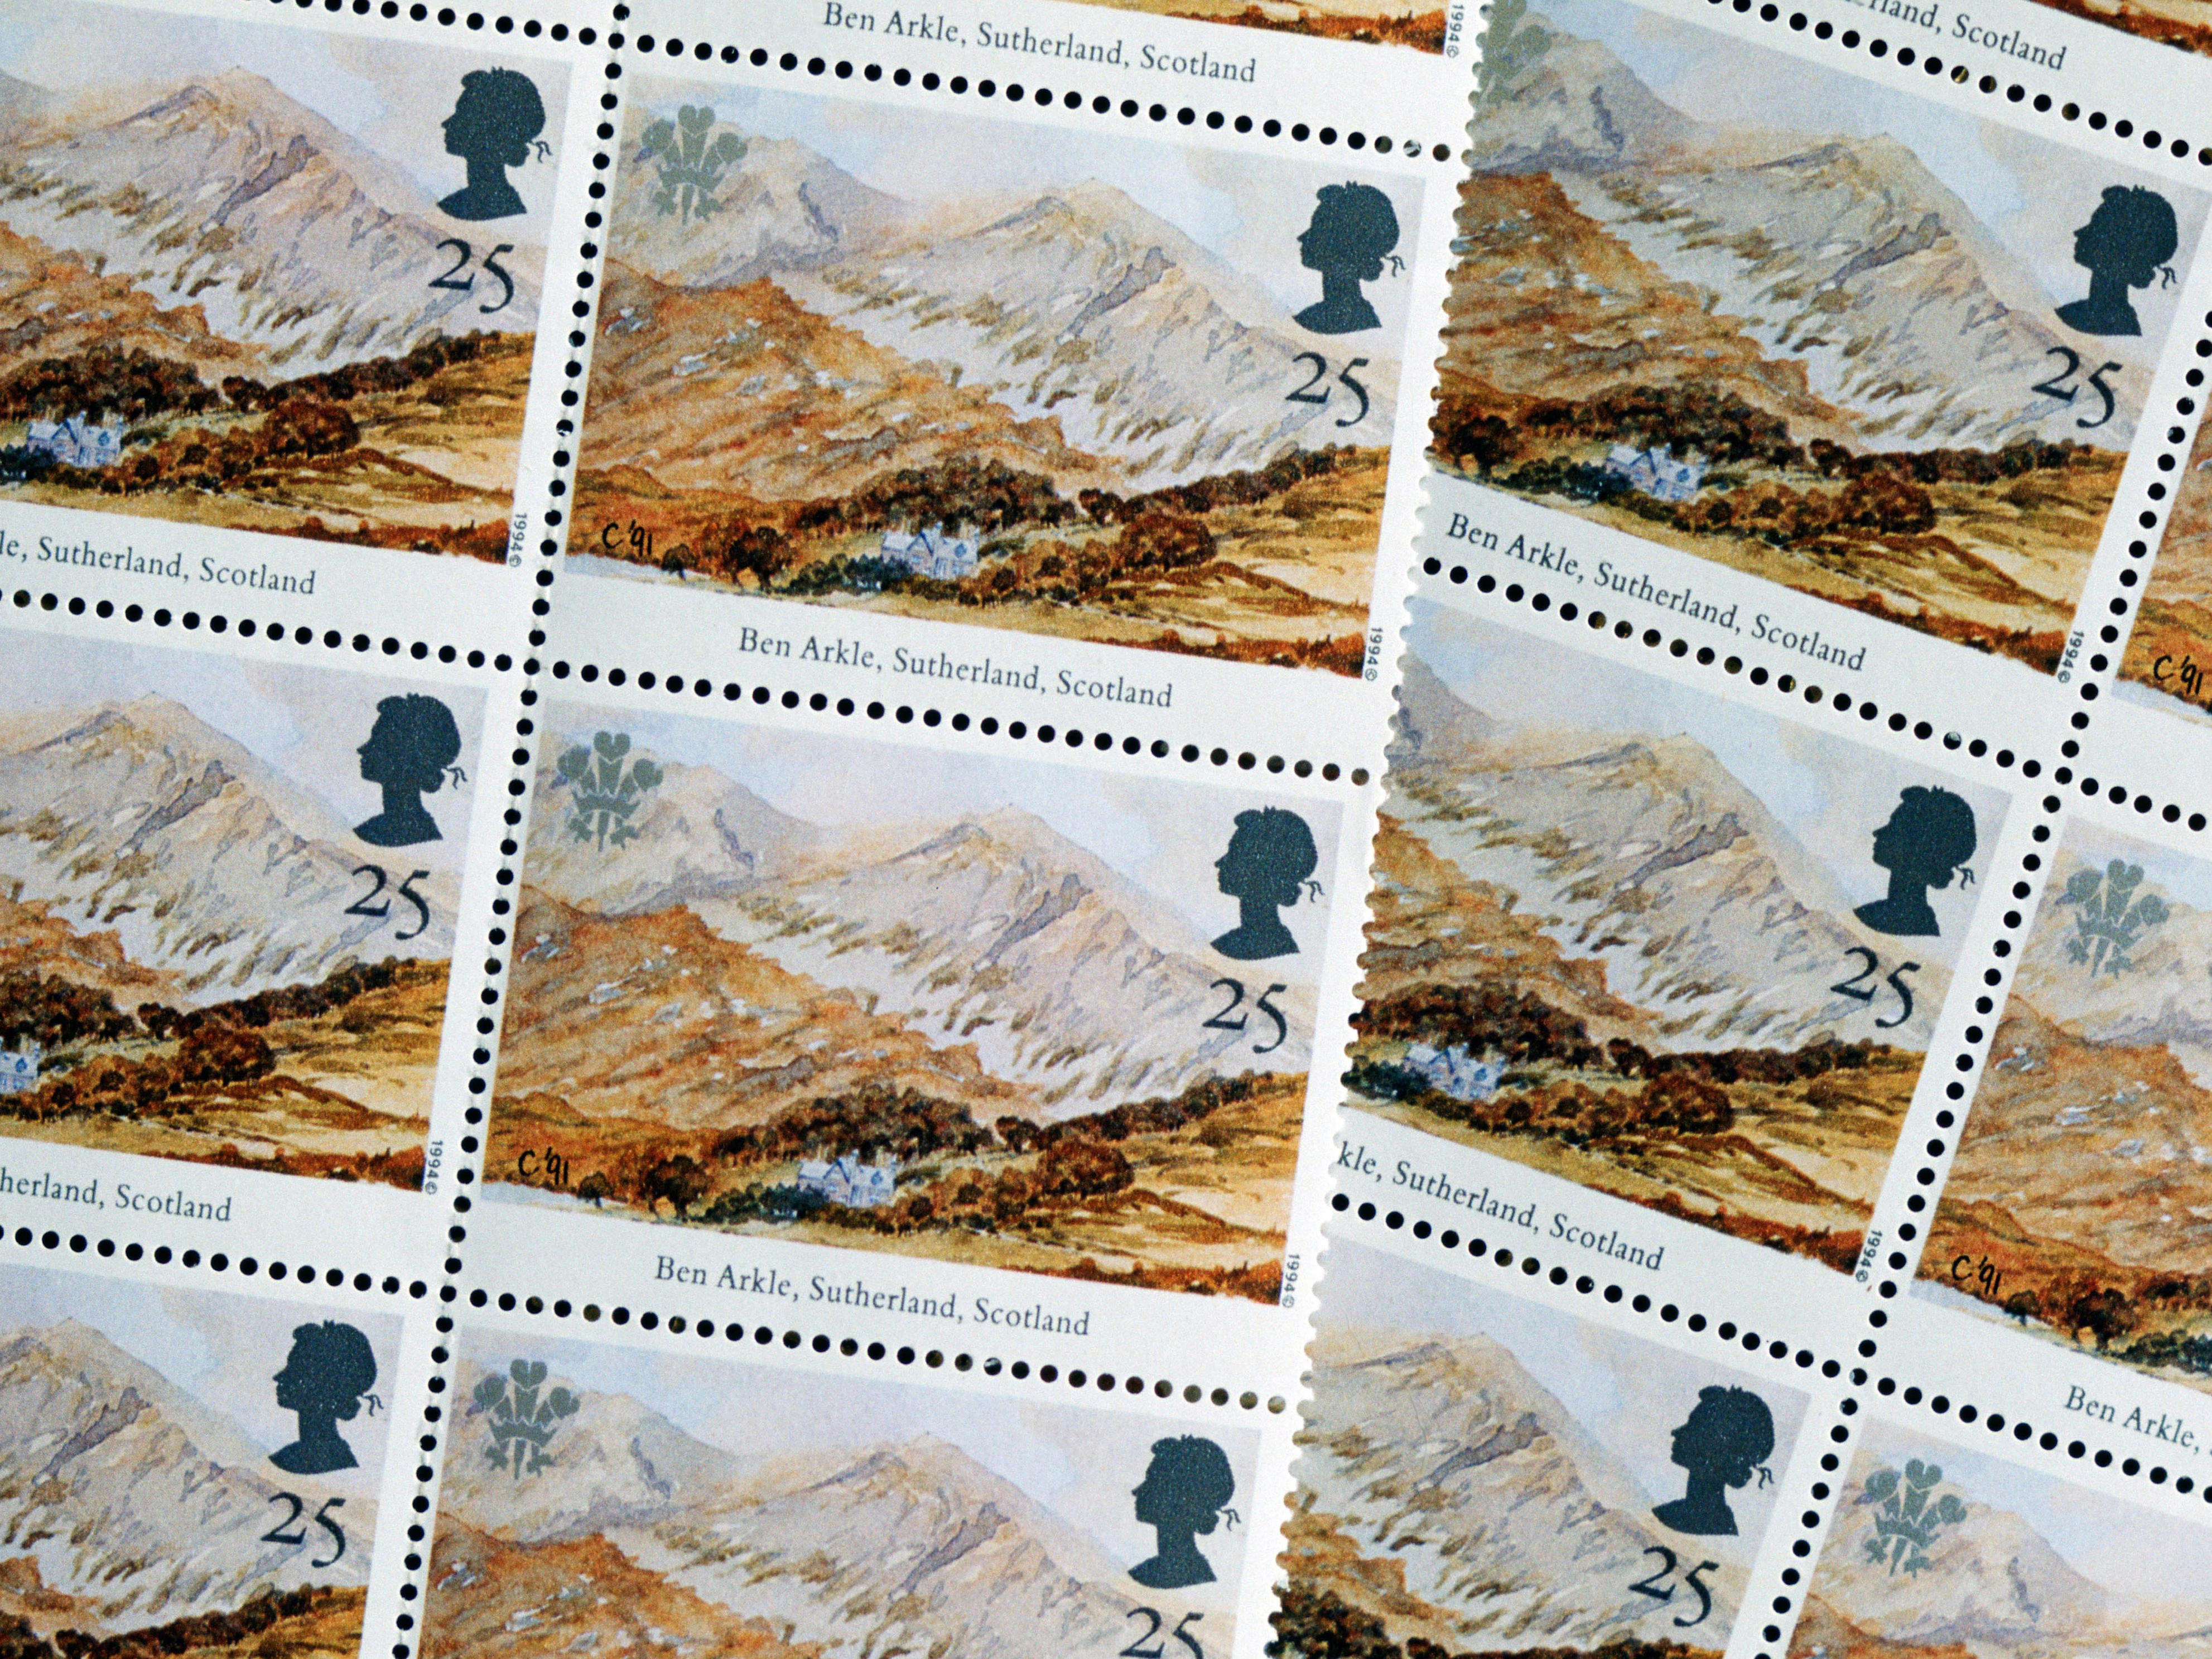 Slide 15 of 16: In 1994, the Royal Mail honored the king by putting his watercolors on its stamps, including this painting of Arkle mountain in Sutherland, Scotland.Arkle is located in the far northwest corner of the Scottish Highlands. Much of the mountain is made up of Cambrian quartzite, which gives it a glistening appearance when seen up close.